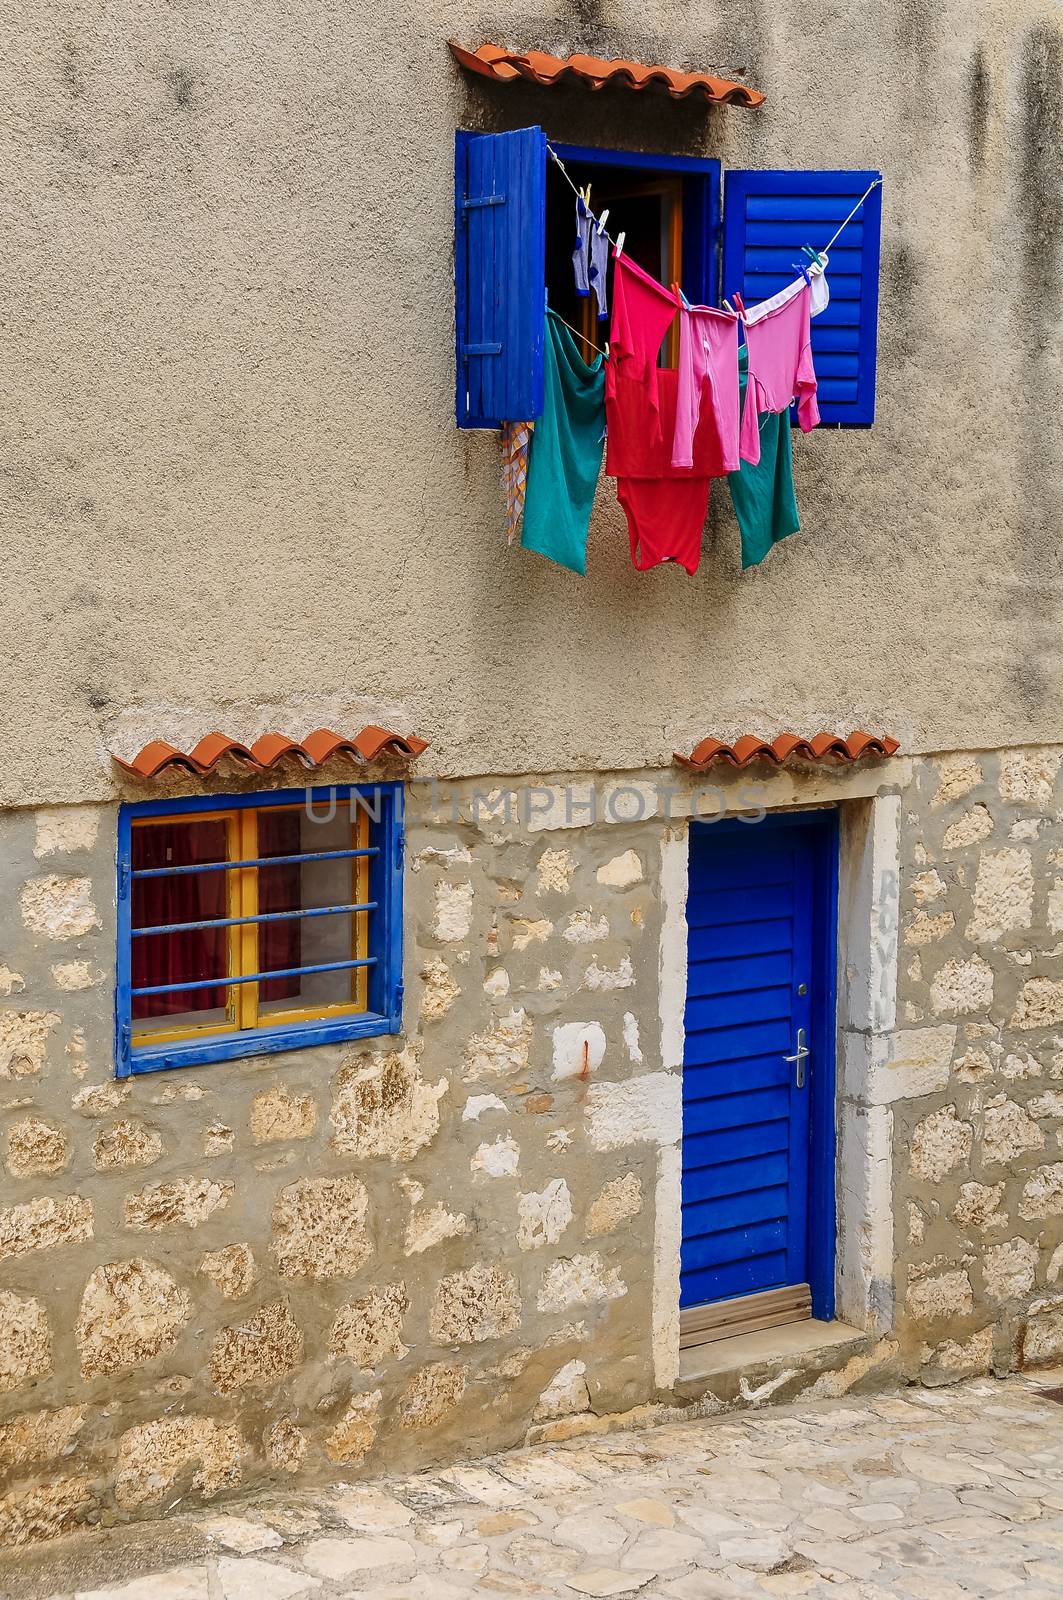 Laundry driying in sun, blue windows and blinds by asafaric